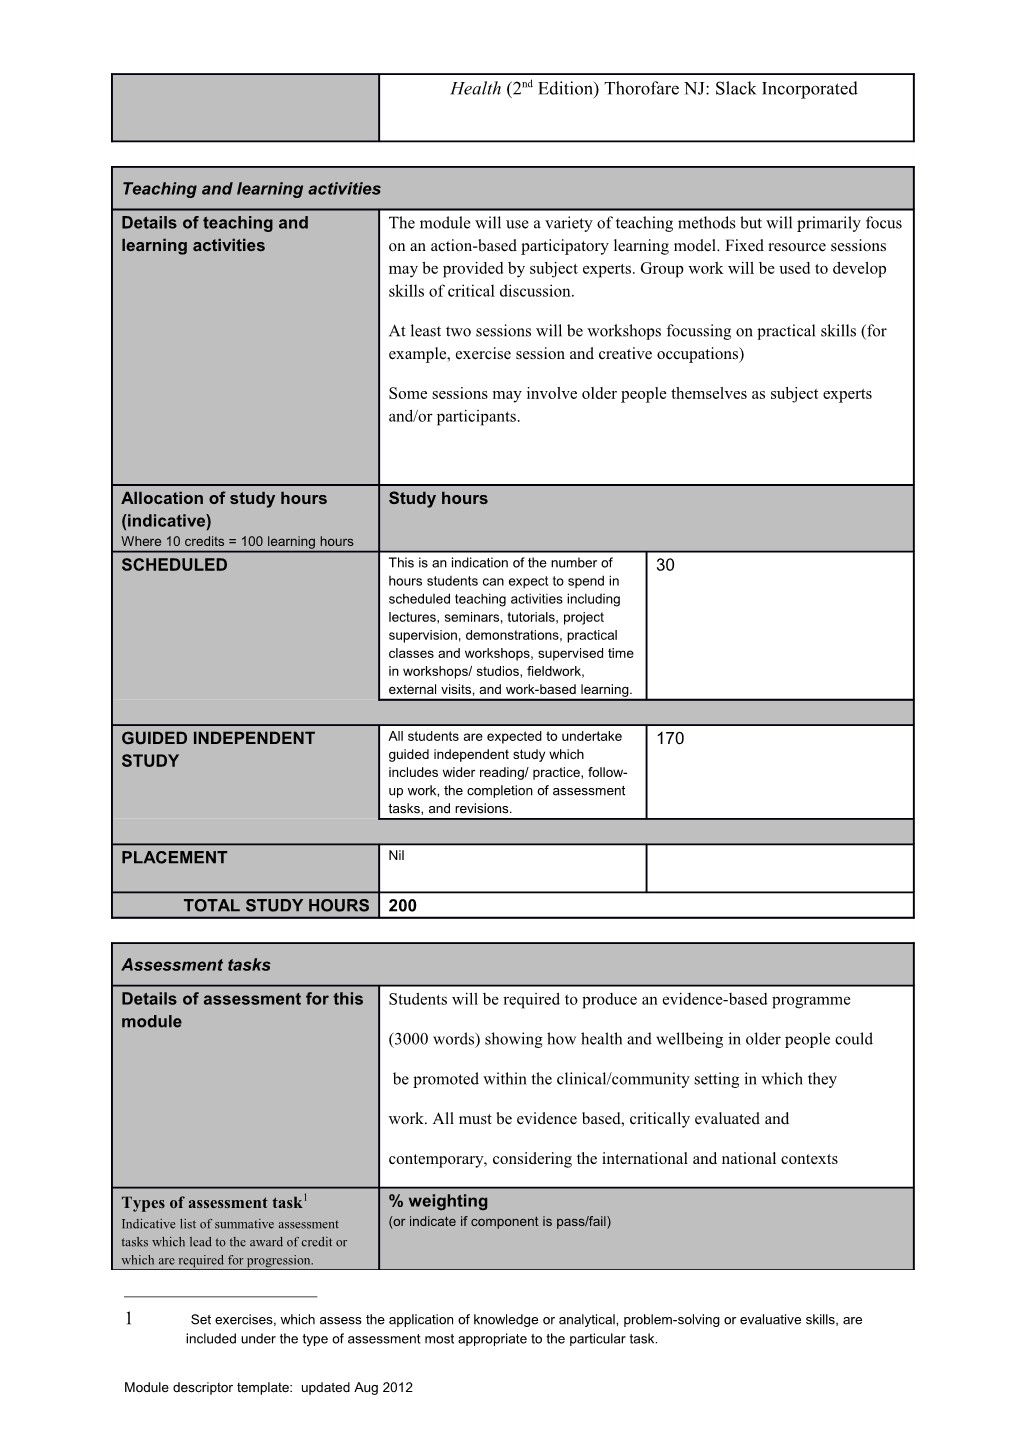 Module Specification Template s16